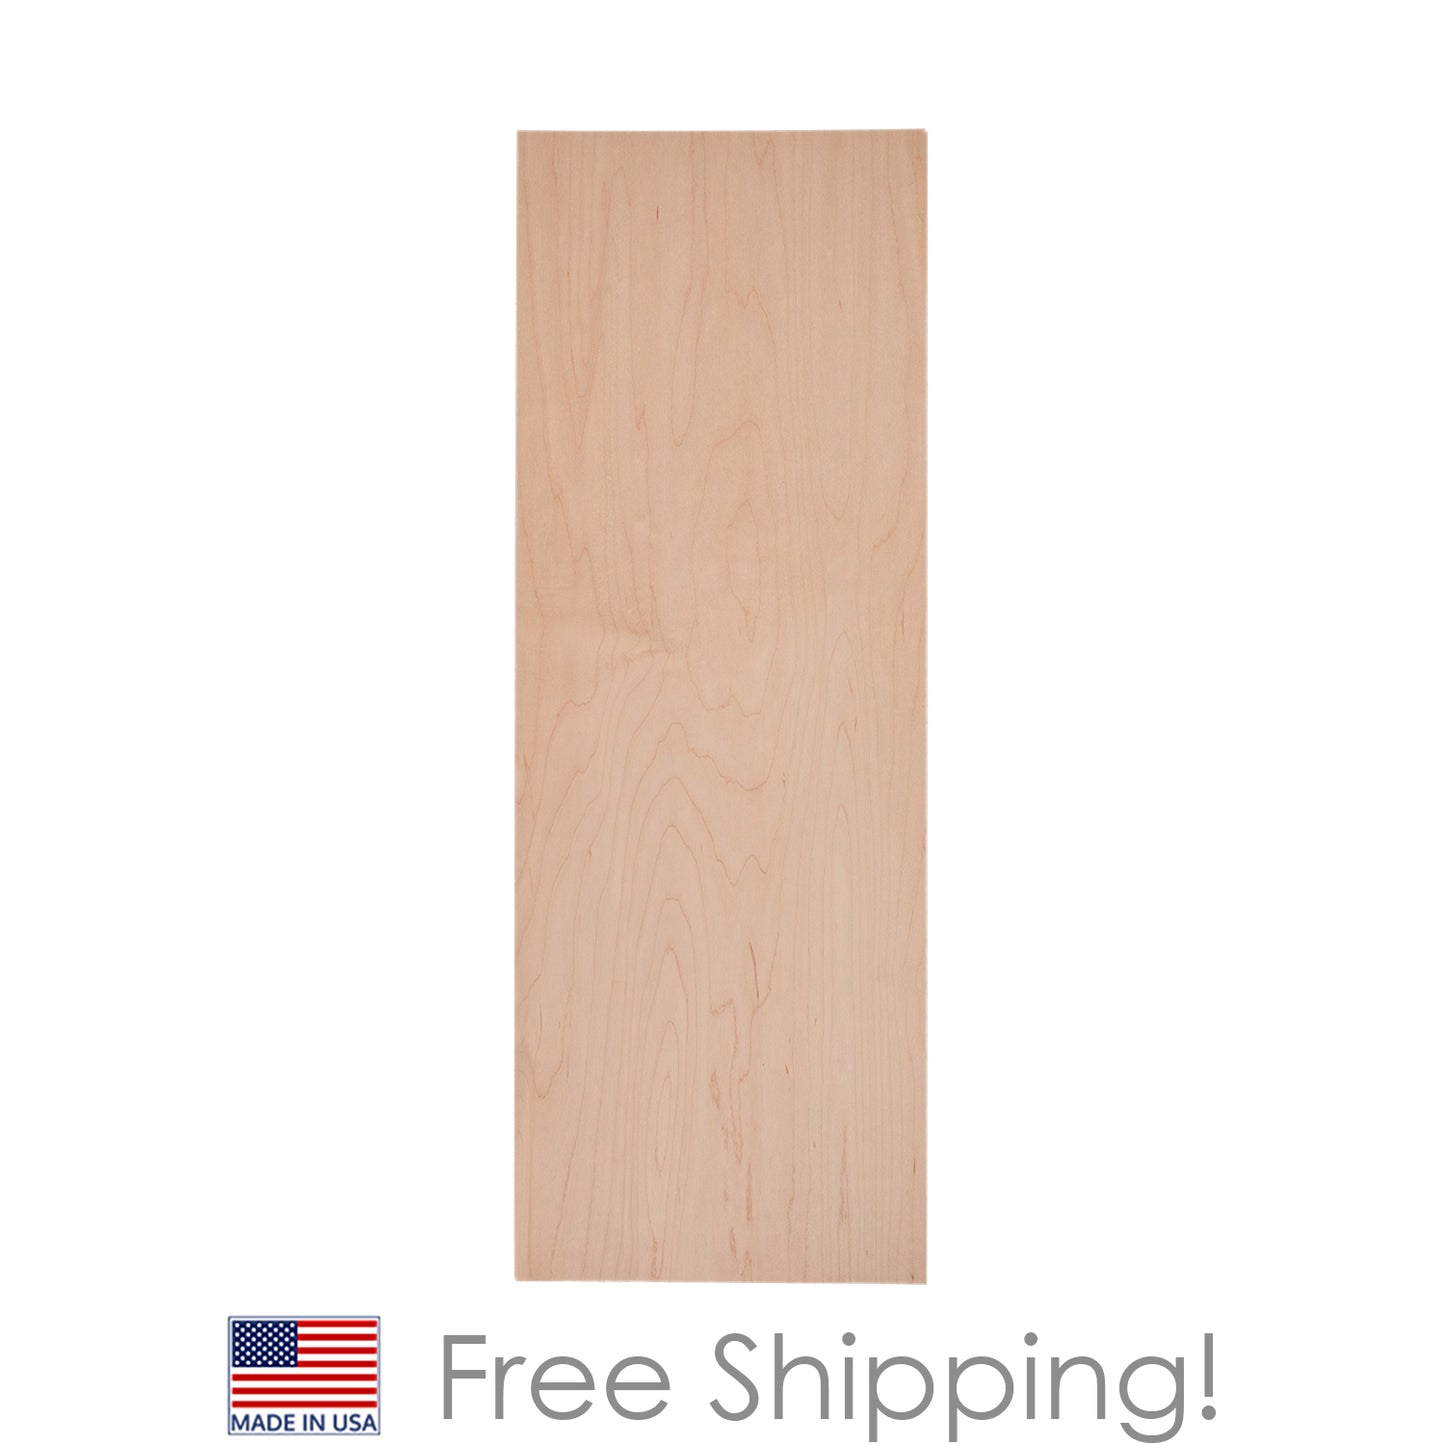 Quicklock RTA (Ready-to-Assemble) Raw Maple .25"X11.25"X42" End Panel